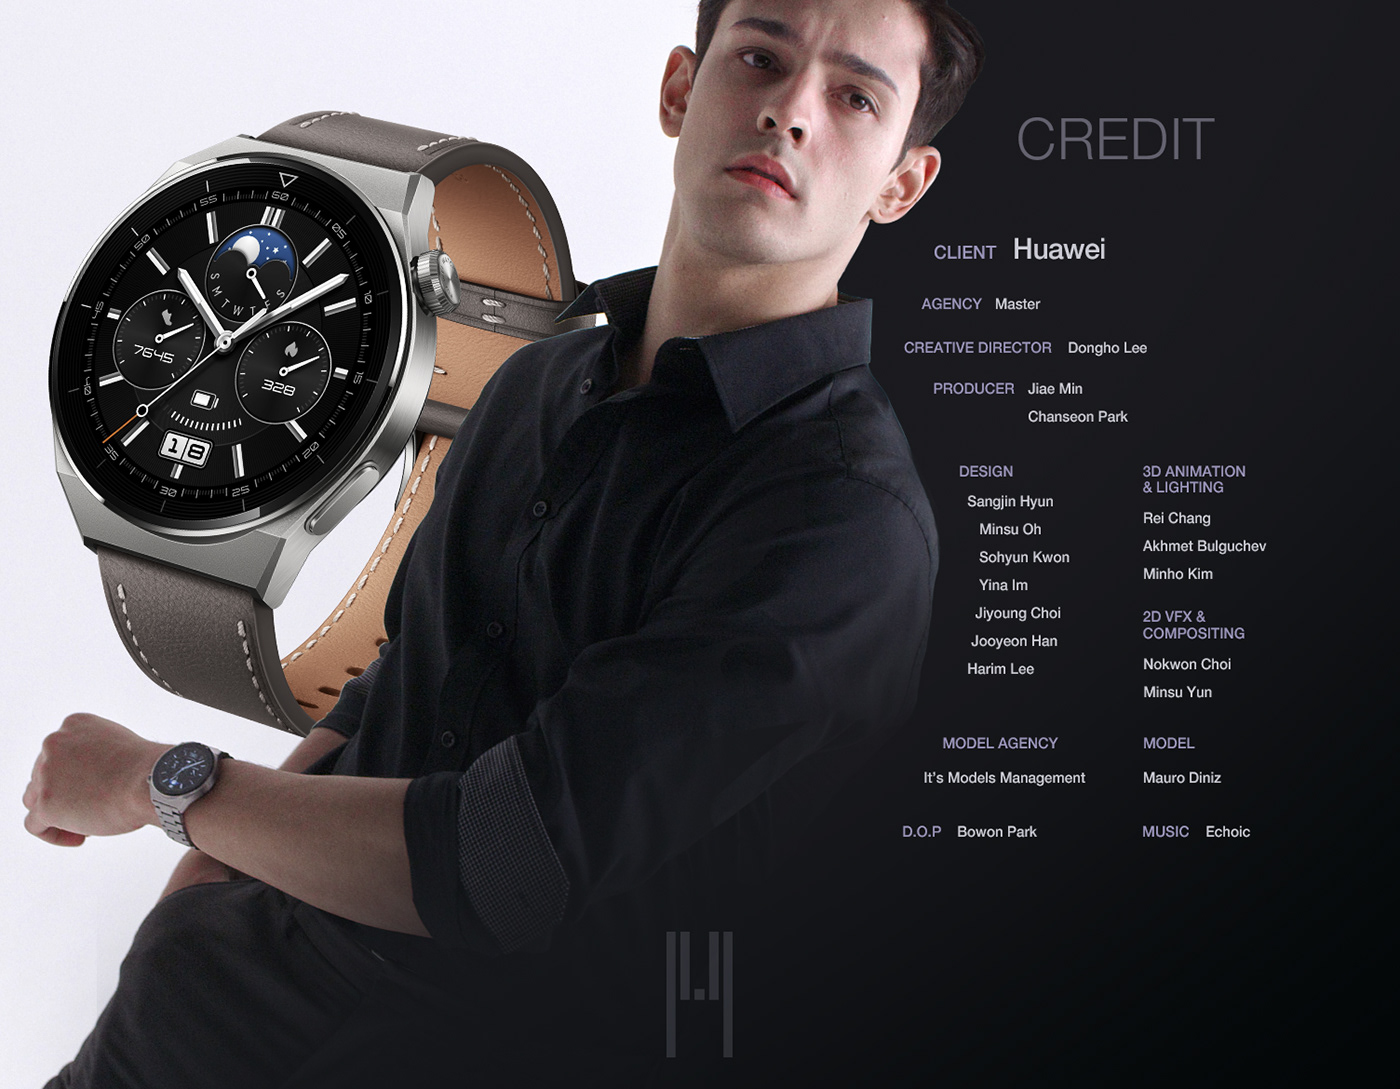 commercial dongho lee huawei huawei watch Huawei watch gt3 pro Master Master Pictures Watch advertising